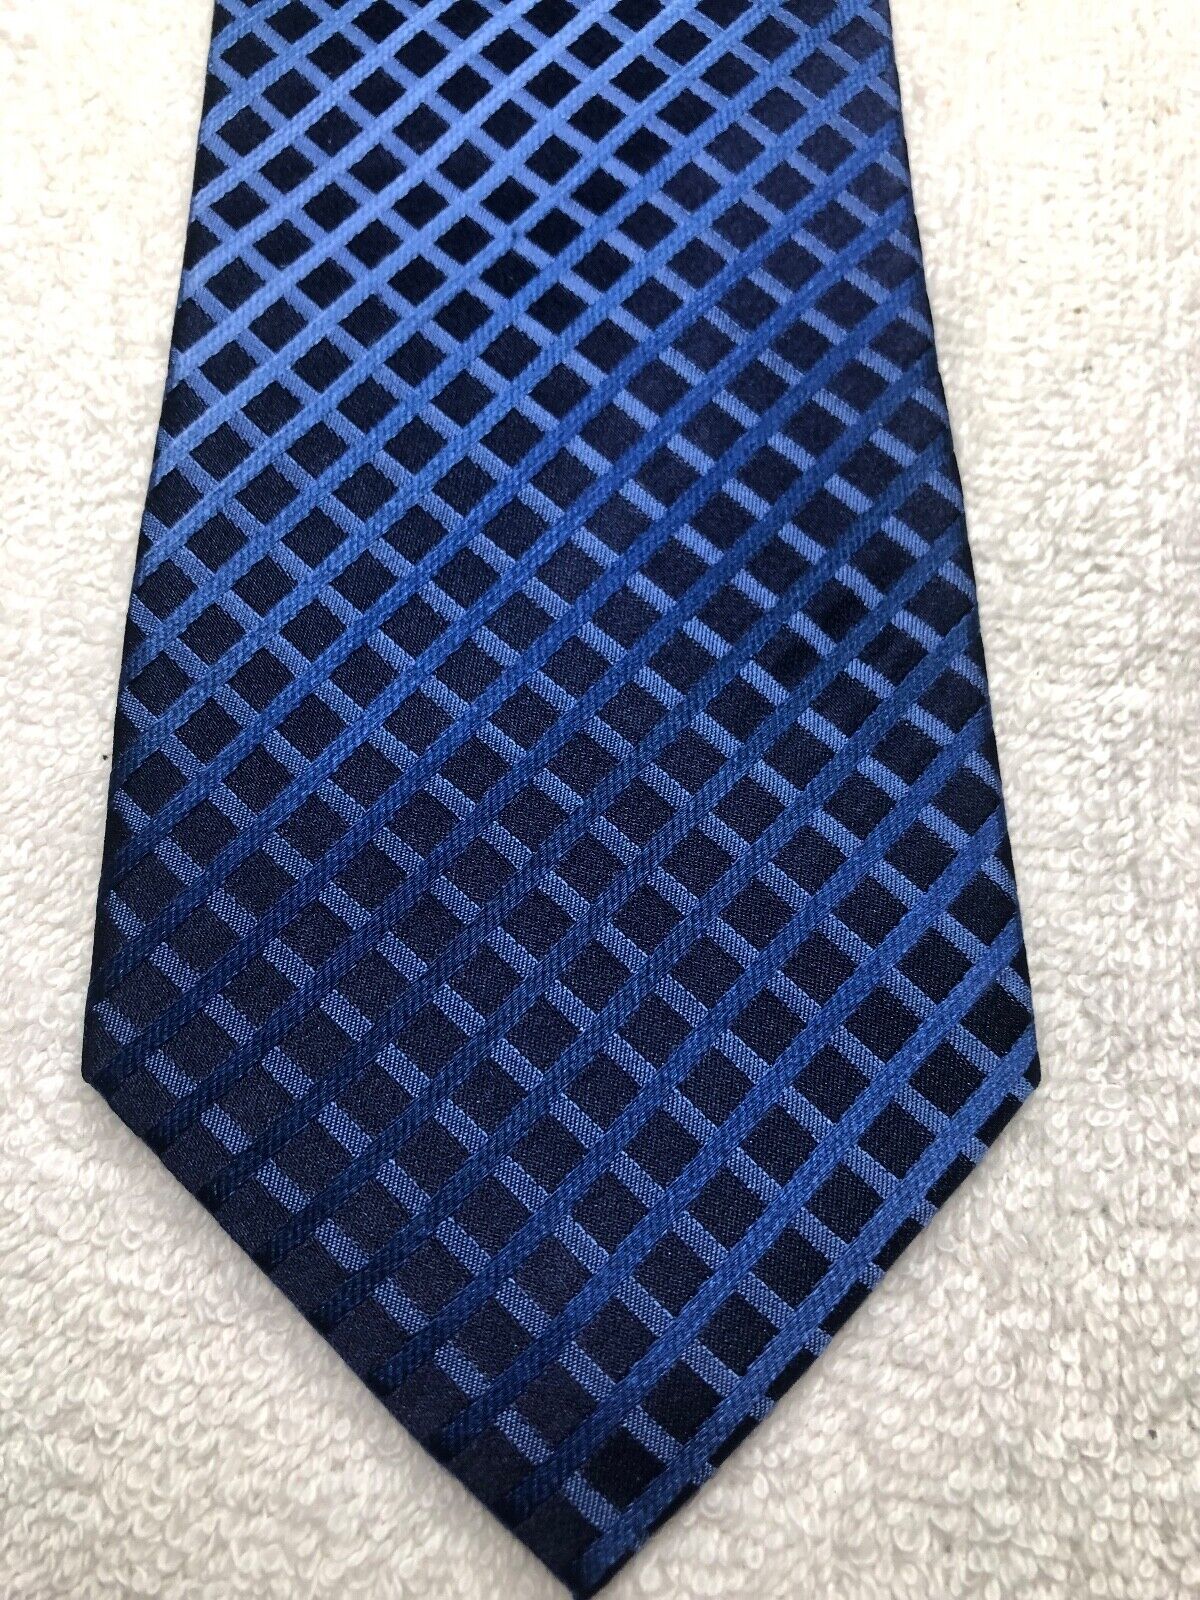 KENNETH COLE MENS TIE NAVY BLUE WITH BLUE 3.5 X 61 - image 1